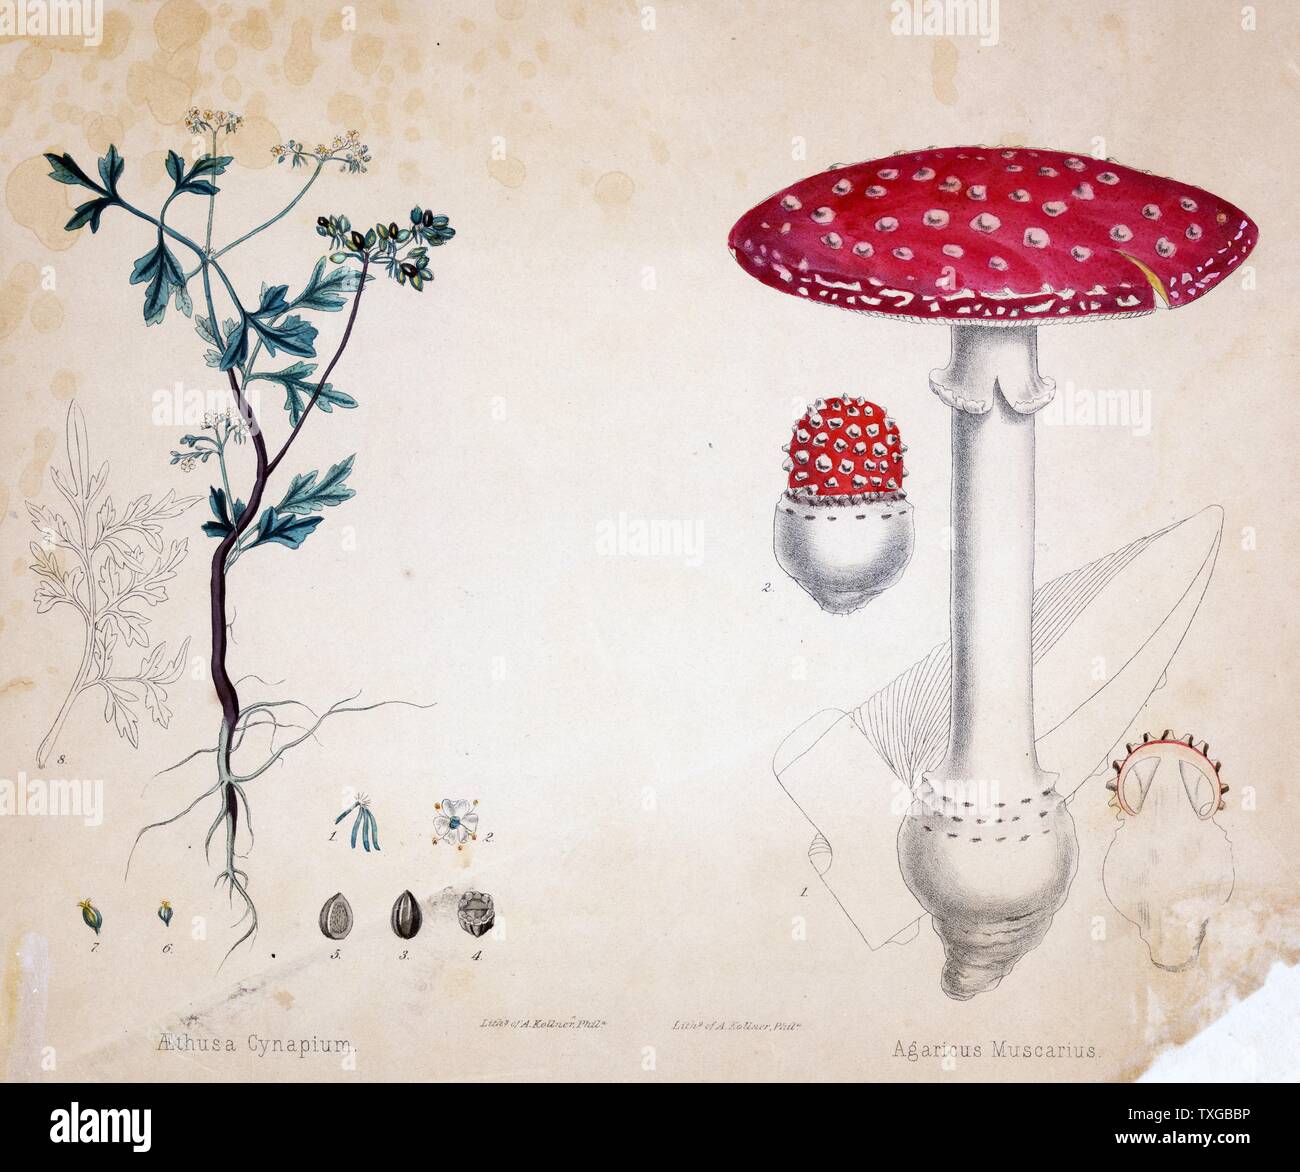 Print specimen of botanical illustrations for Aethusa Cynapium, an herb, and Agaricus Muscarius, a mushroom Stock Photo